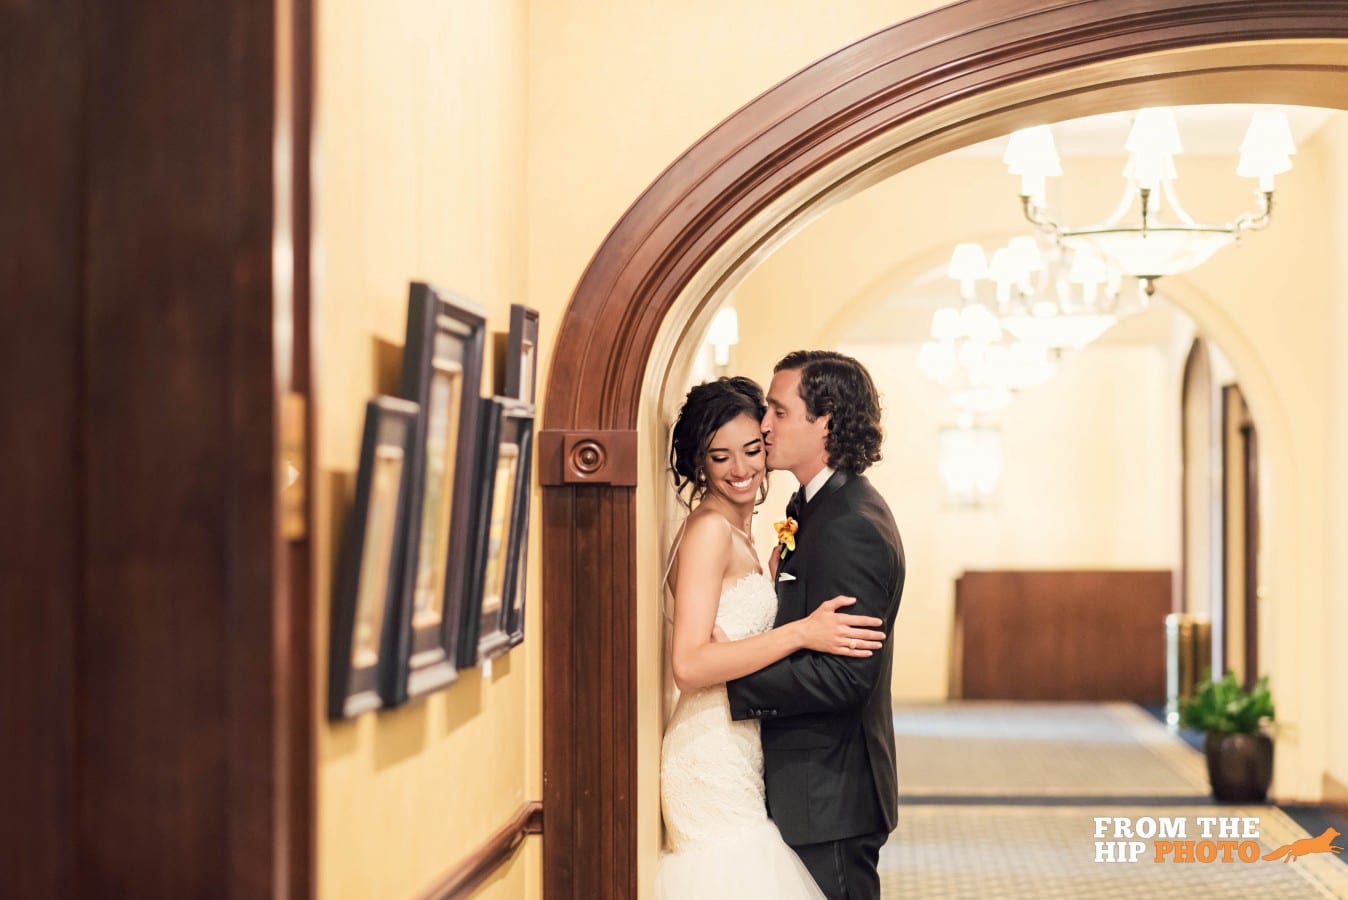 L'Meese and Mark | Denver Athletic Club Wedding Photography | From the Hip Photo